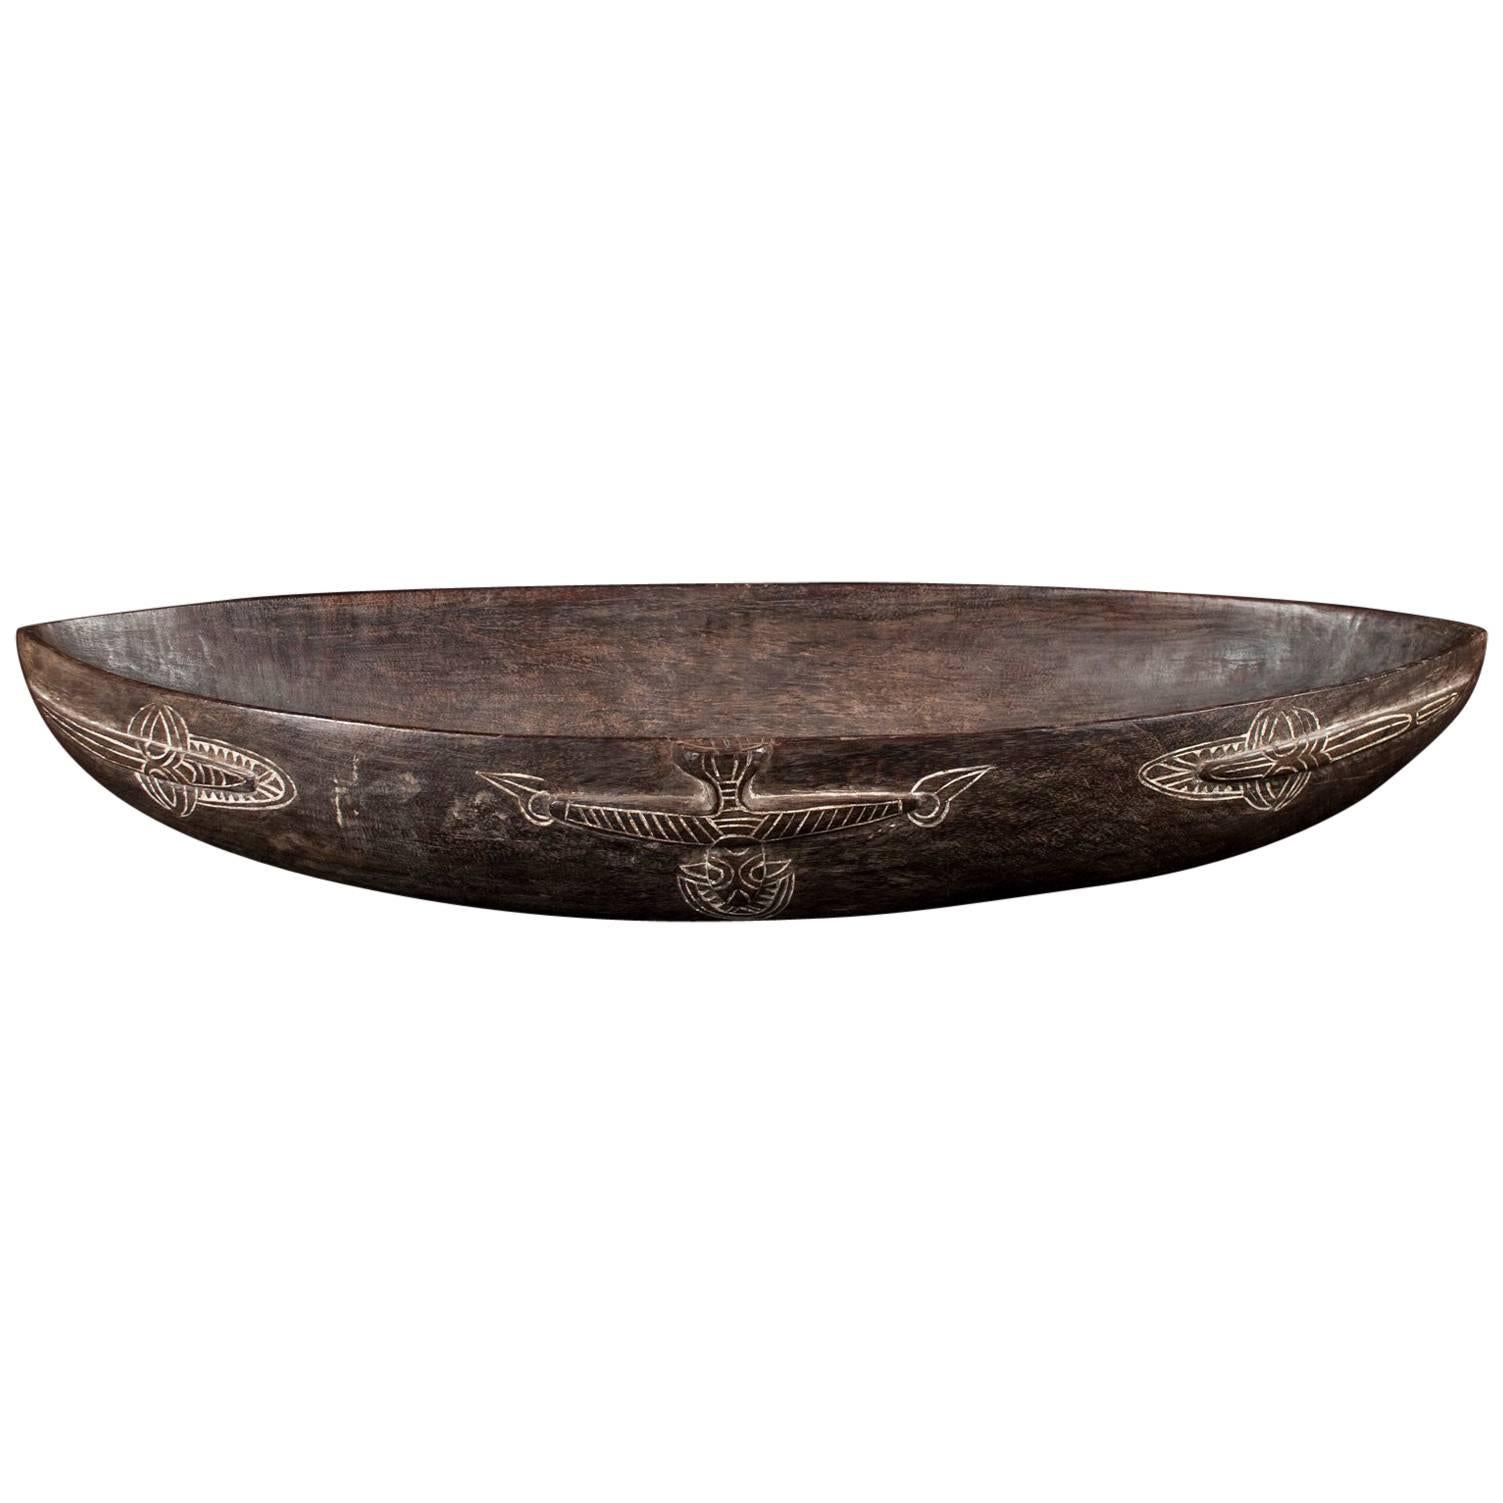 Mid-20th Century Large Tribal Wood Food Bowl, Papua New Guinea